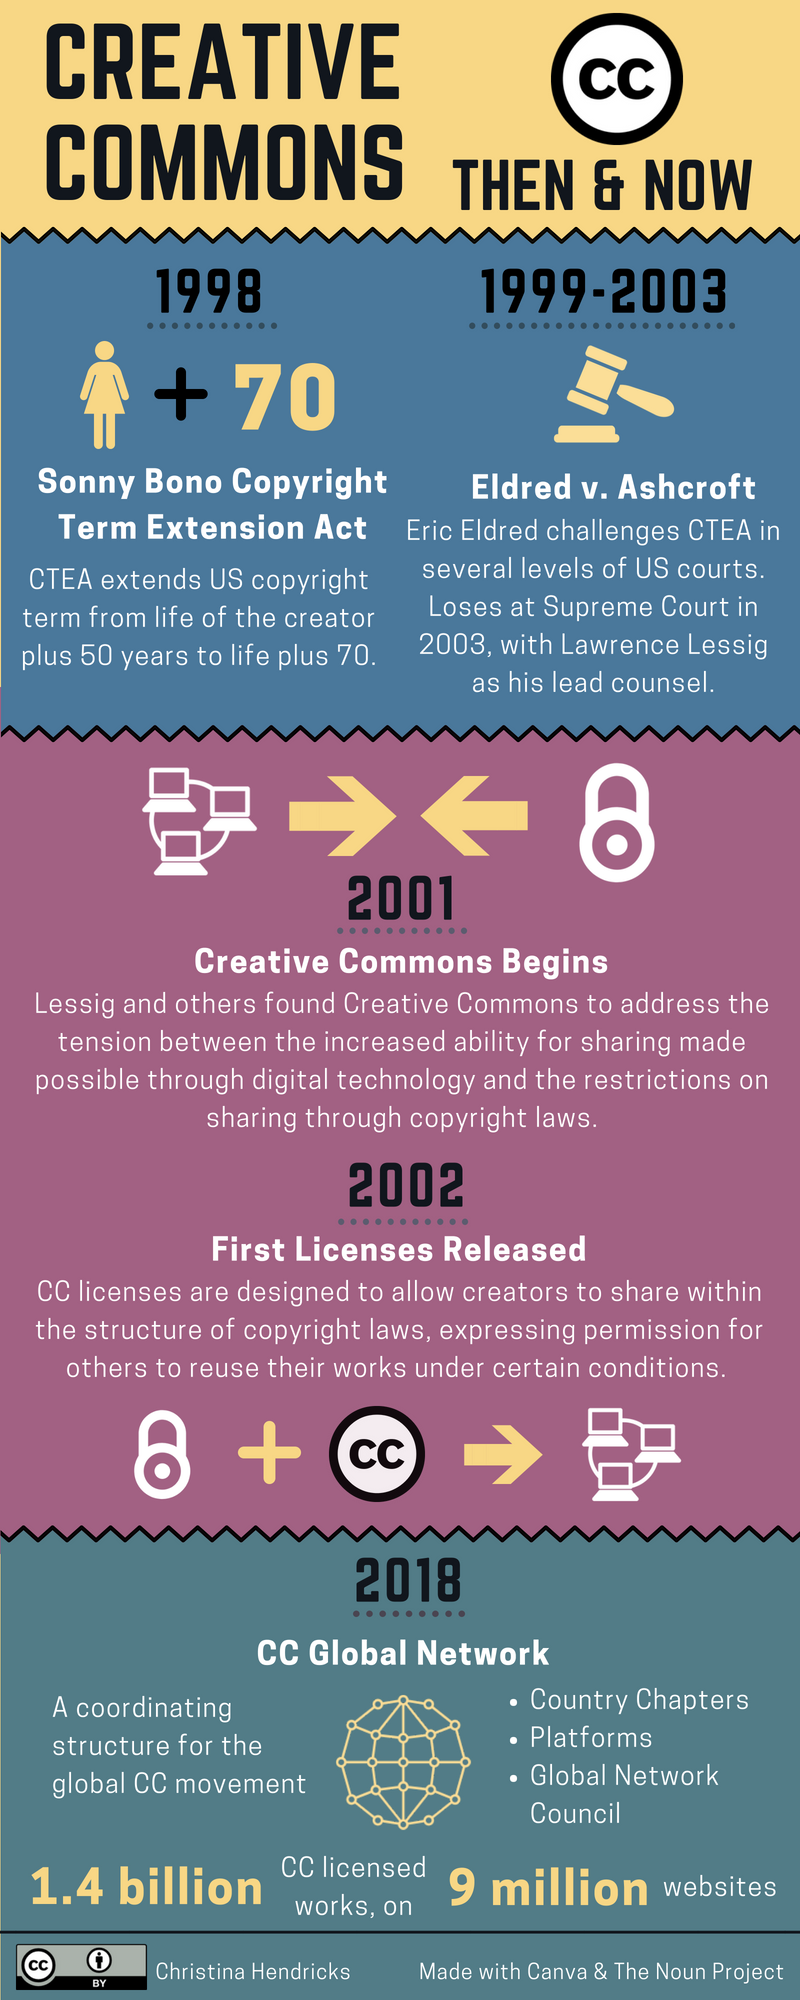 infographic on the past and present of Creative Commons